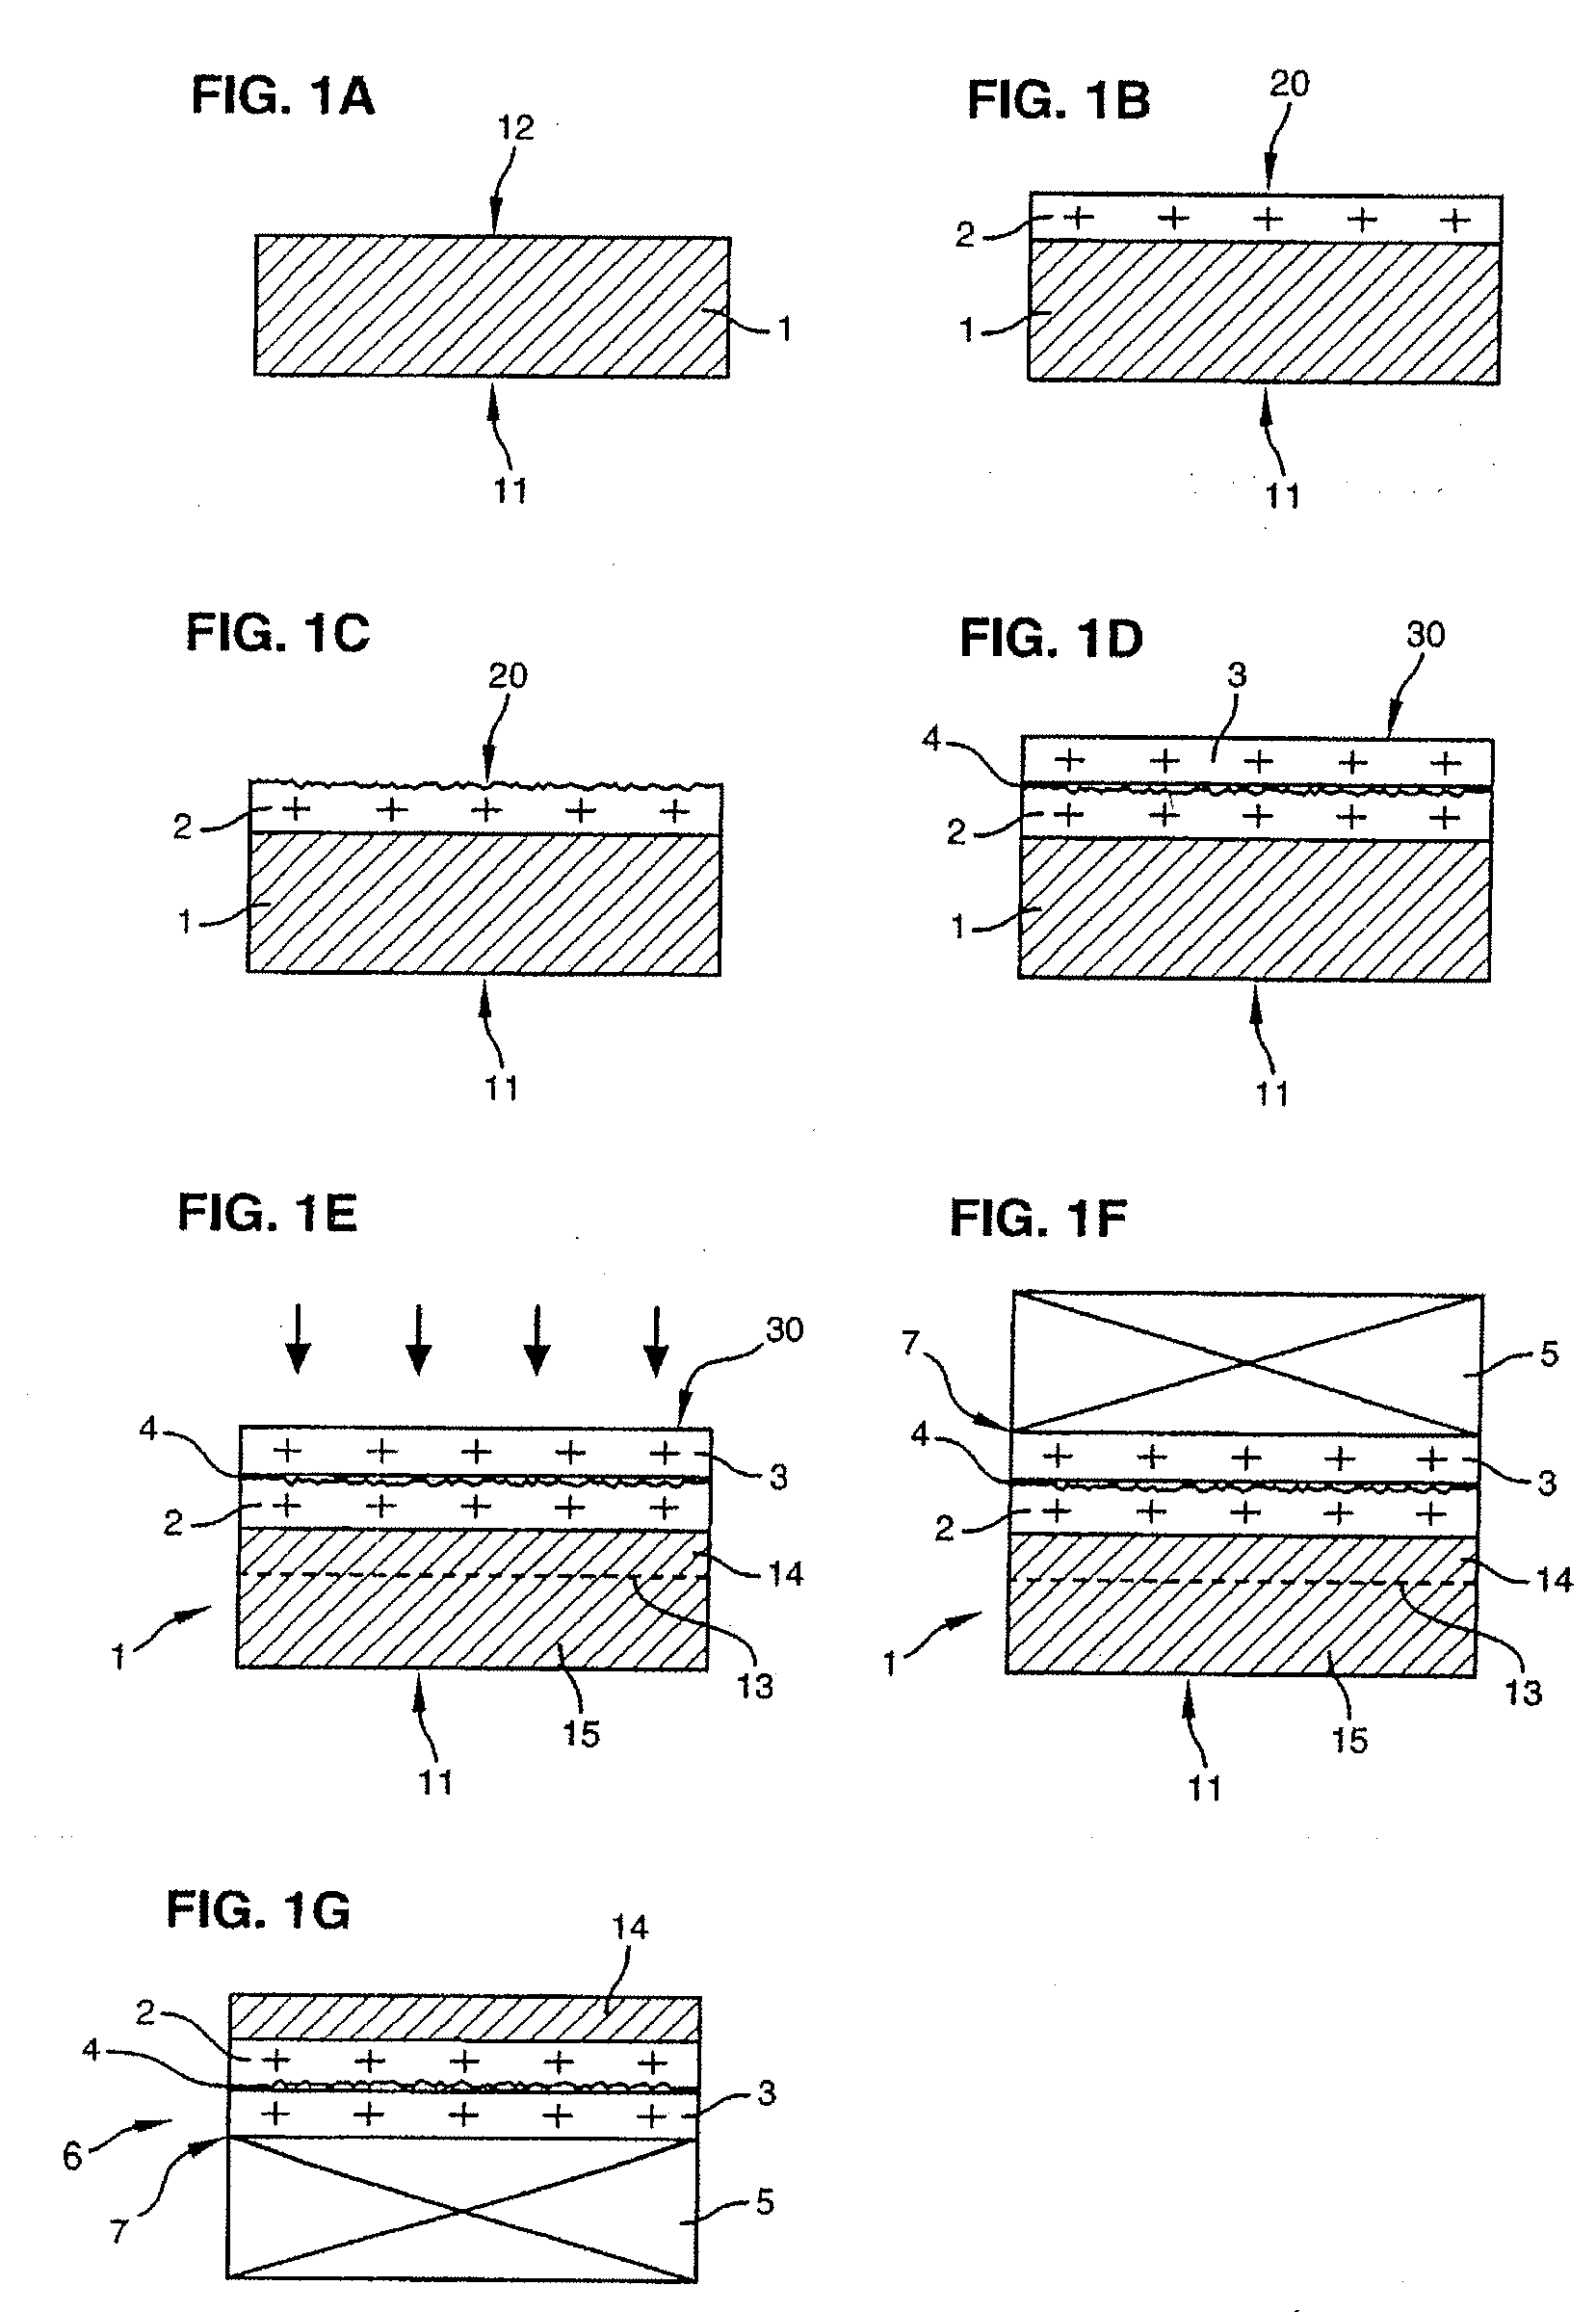 Fabrication of hybrid substrate with defect trapping zone